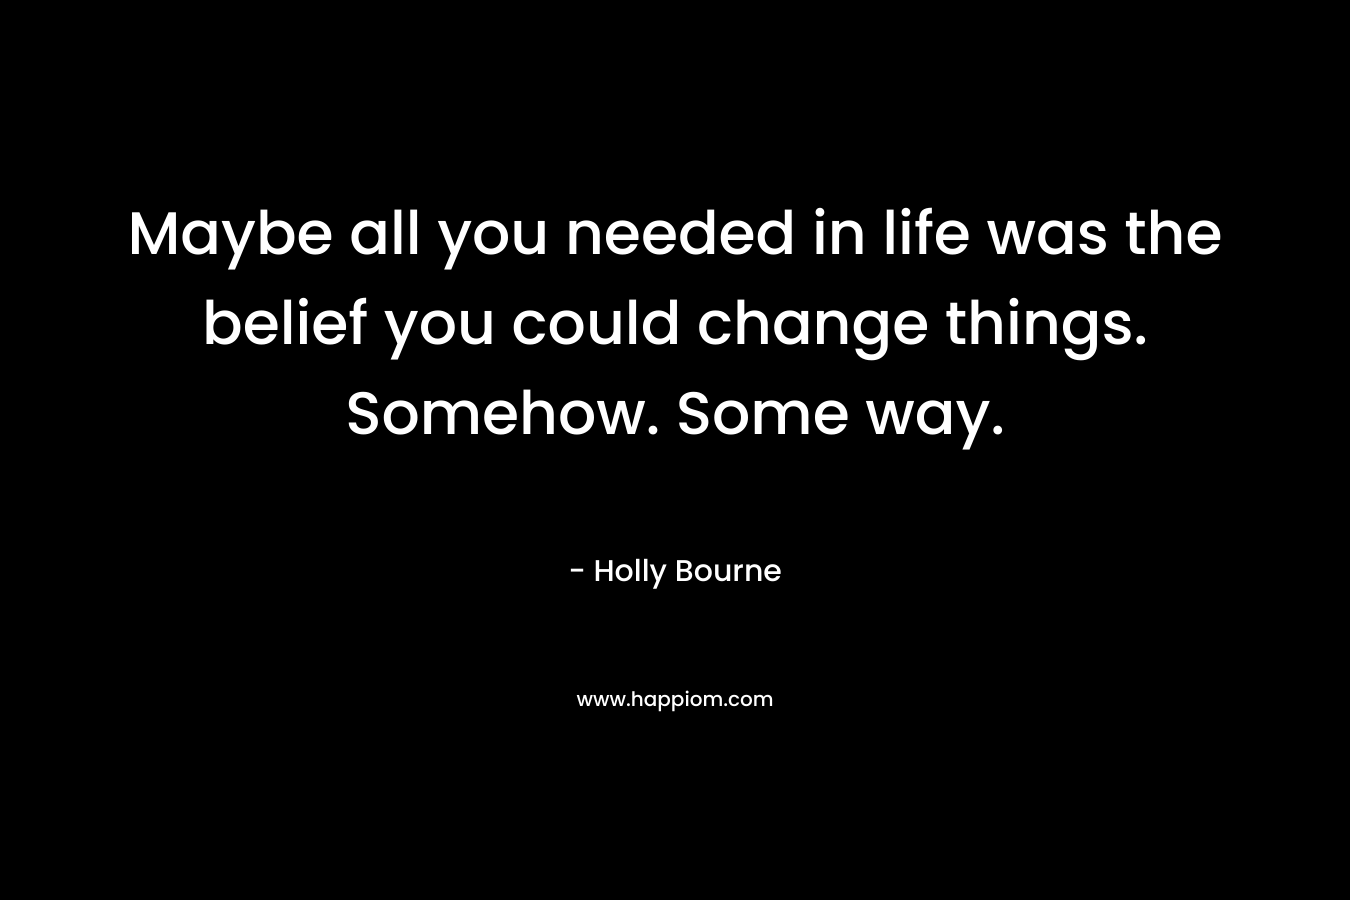 Maybe all you needed in life was the belief you could change things. Somehow. Some way.